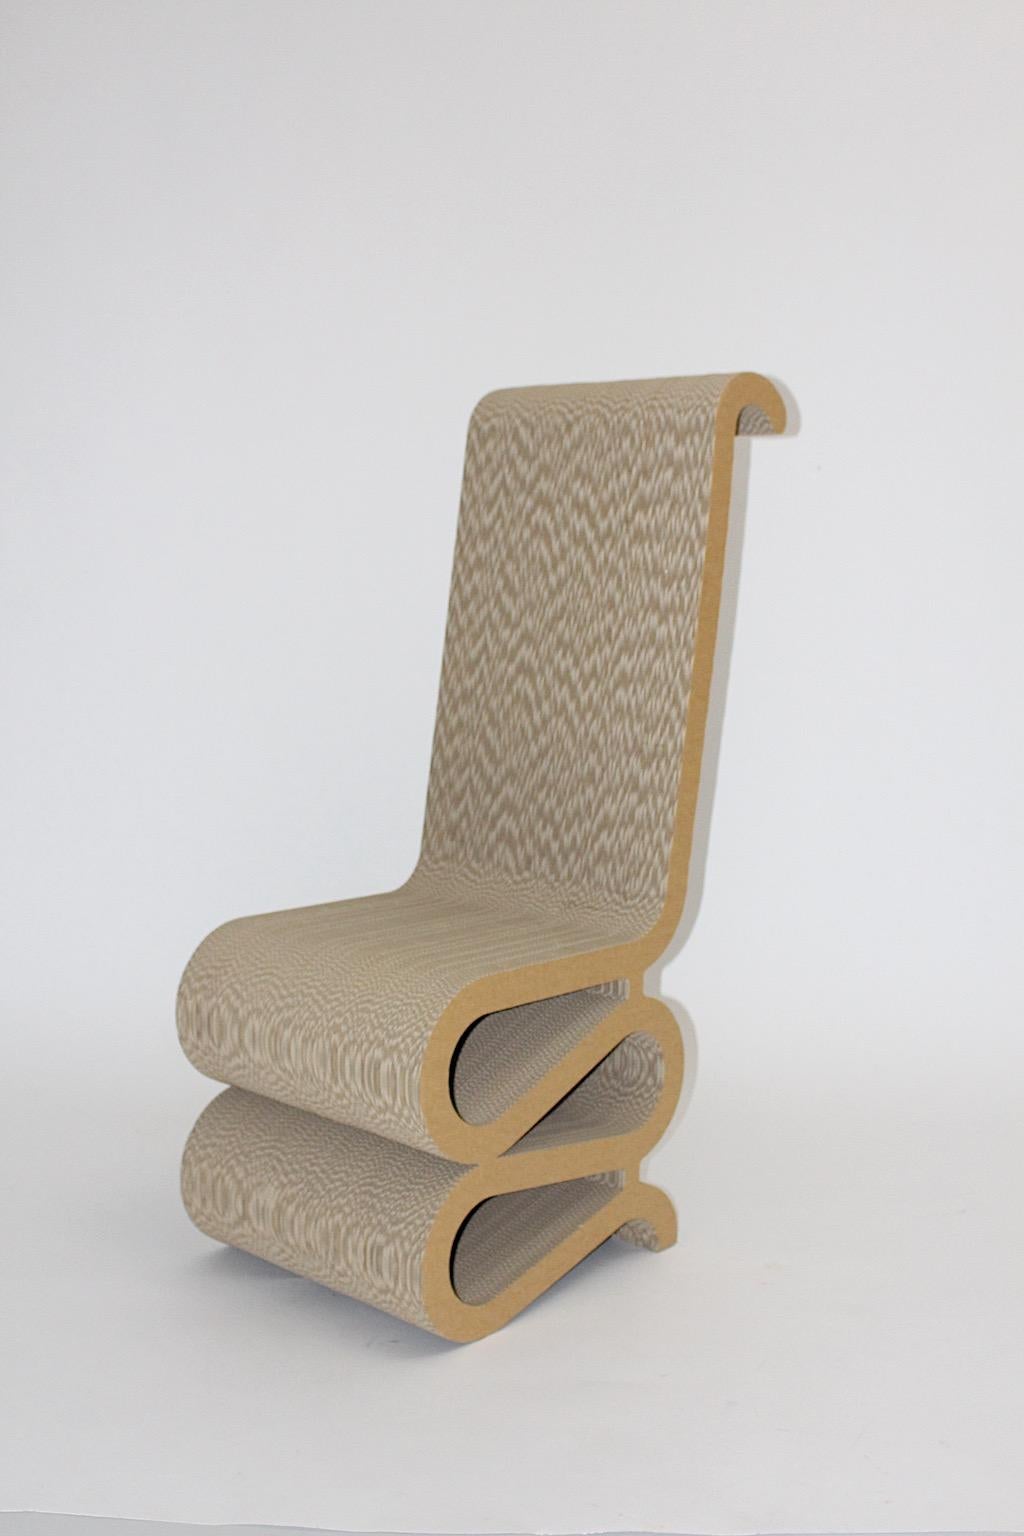 Paper Frank Gehry Attributed Vintage Curved Cardboard Side Chair or Chair, 1970s For Sale